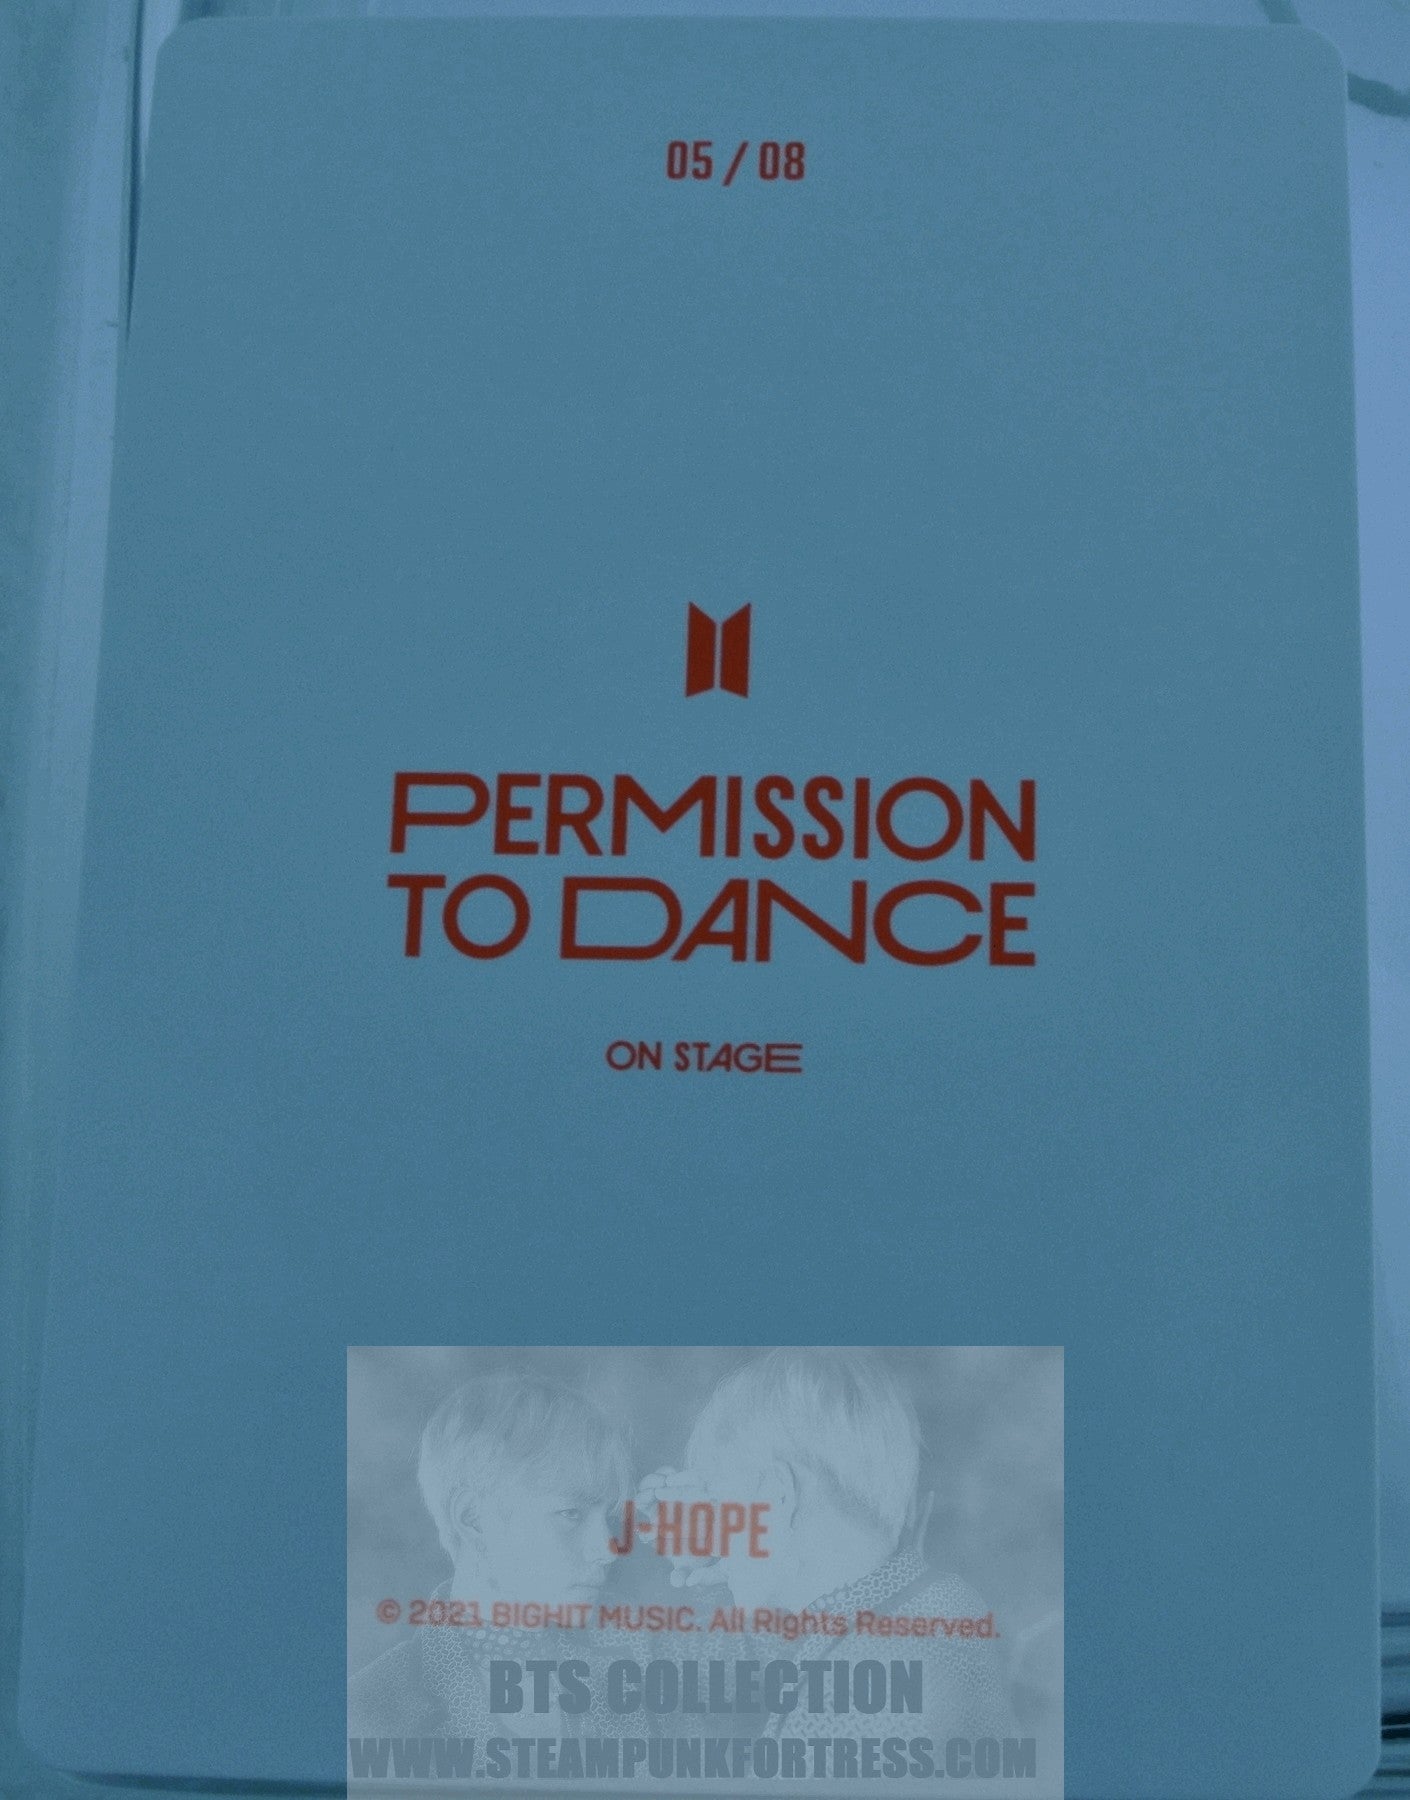 BTS J-HOPE JUNG HOSEOK HO-SEOK JHOPE 2021 PERMISSION TO DANCE ON STAGE #5 OF 8 PHOTOCARD PHOTO CARD PTD PC NEW OFFICIAL MERCHANDISE